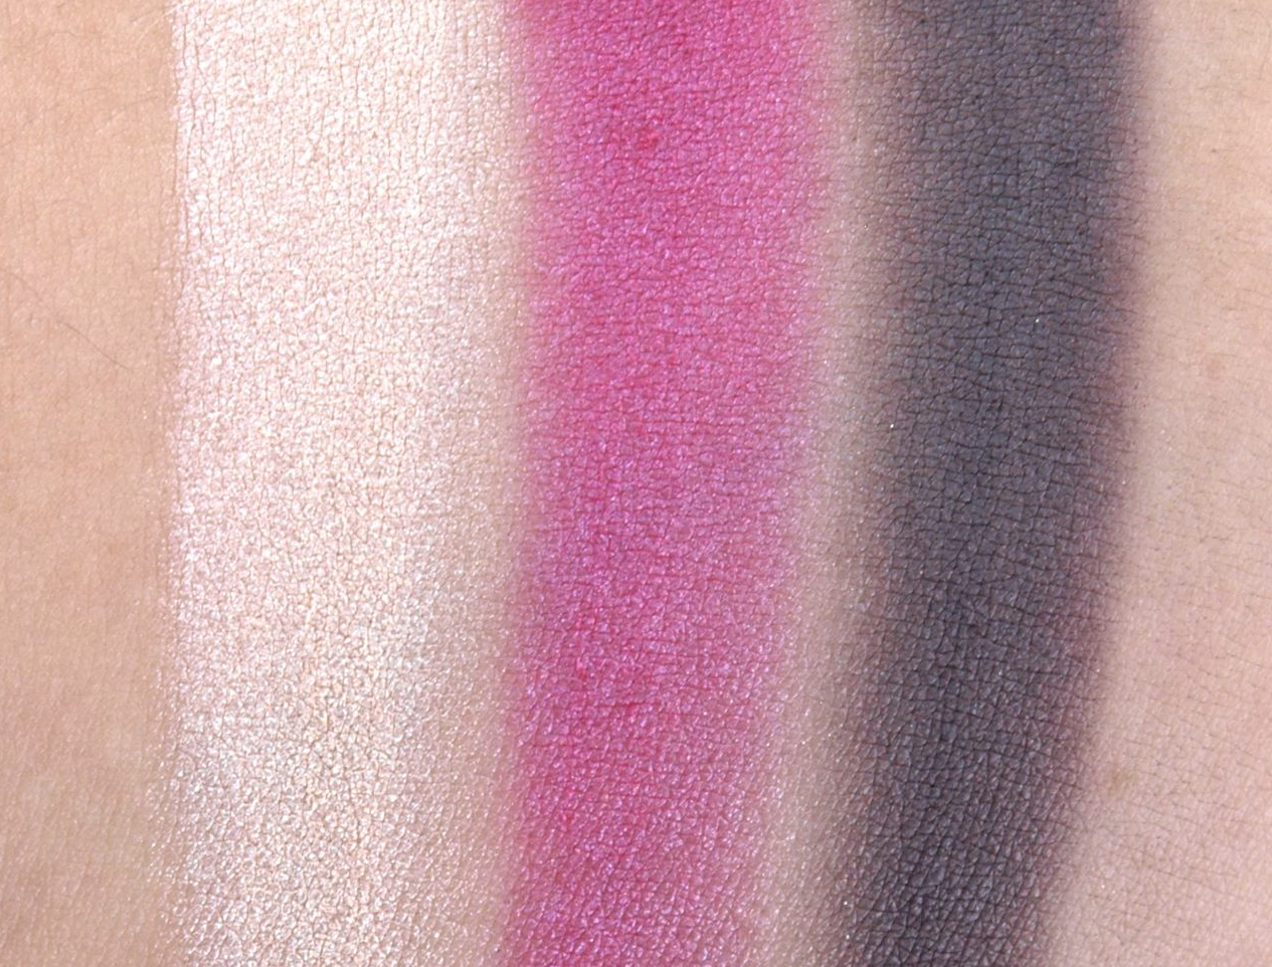 Marc Jacobs Style Eye-Con No.3 Plush Shadow in "The Rebel 106": Review and Swatches